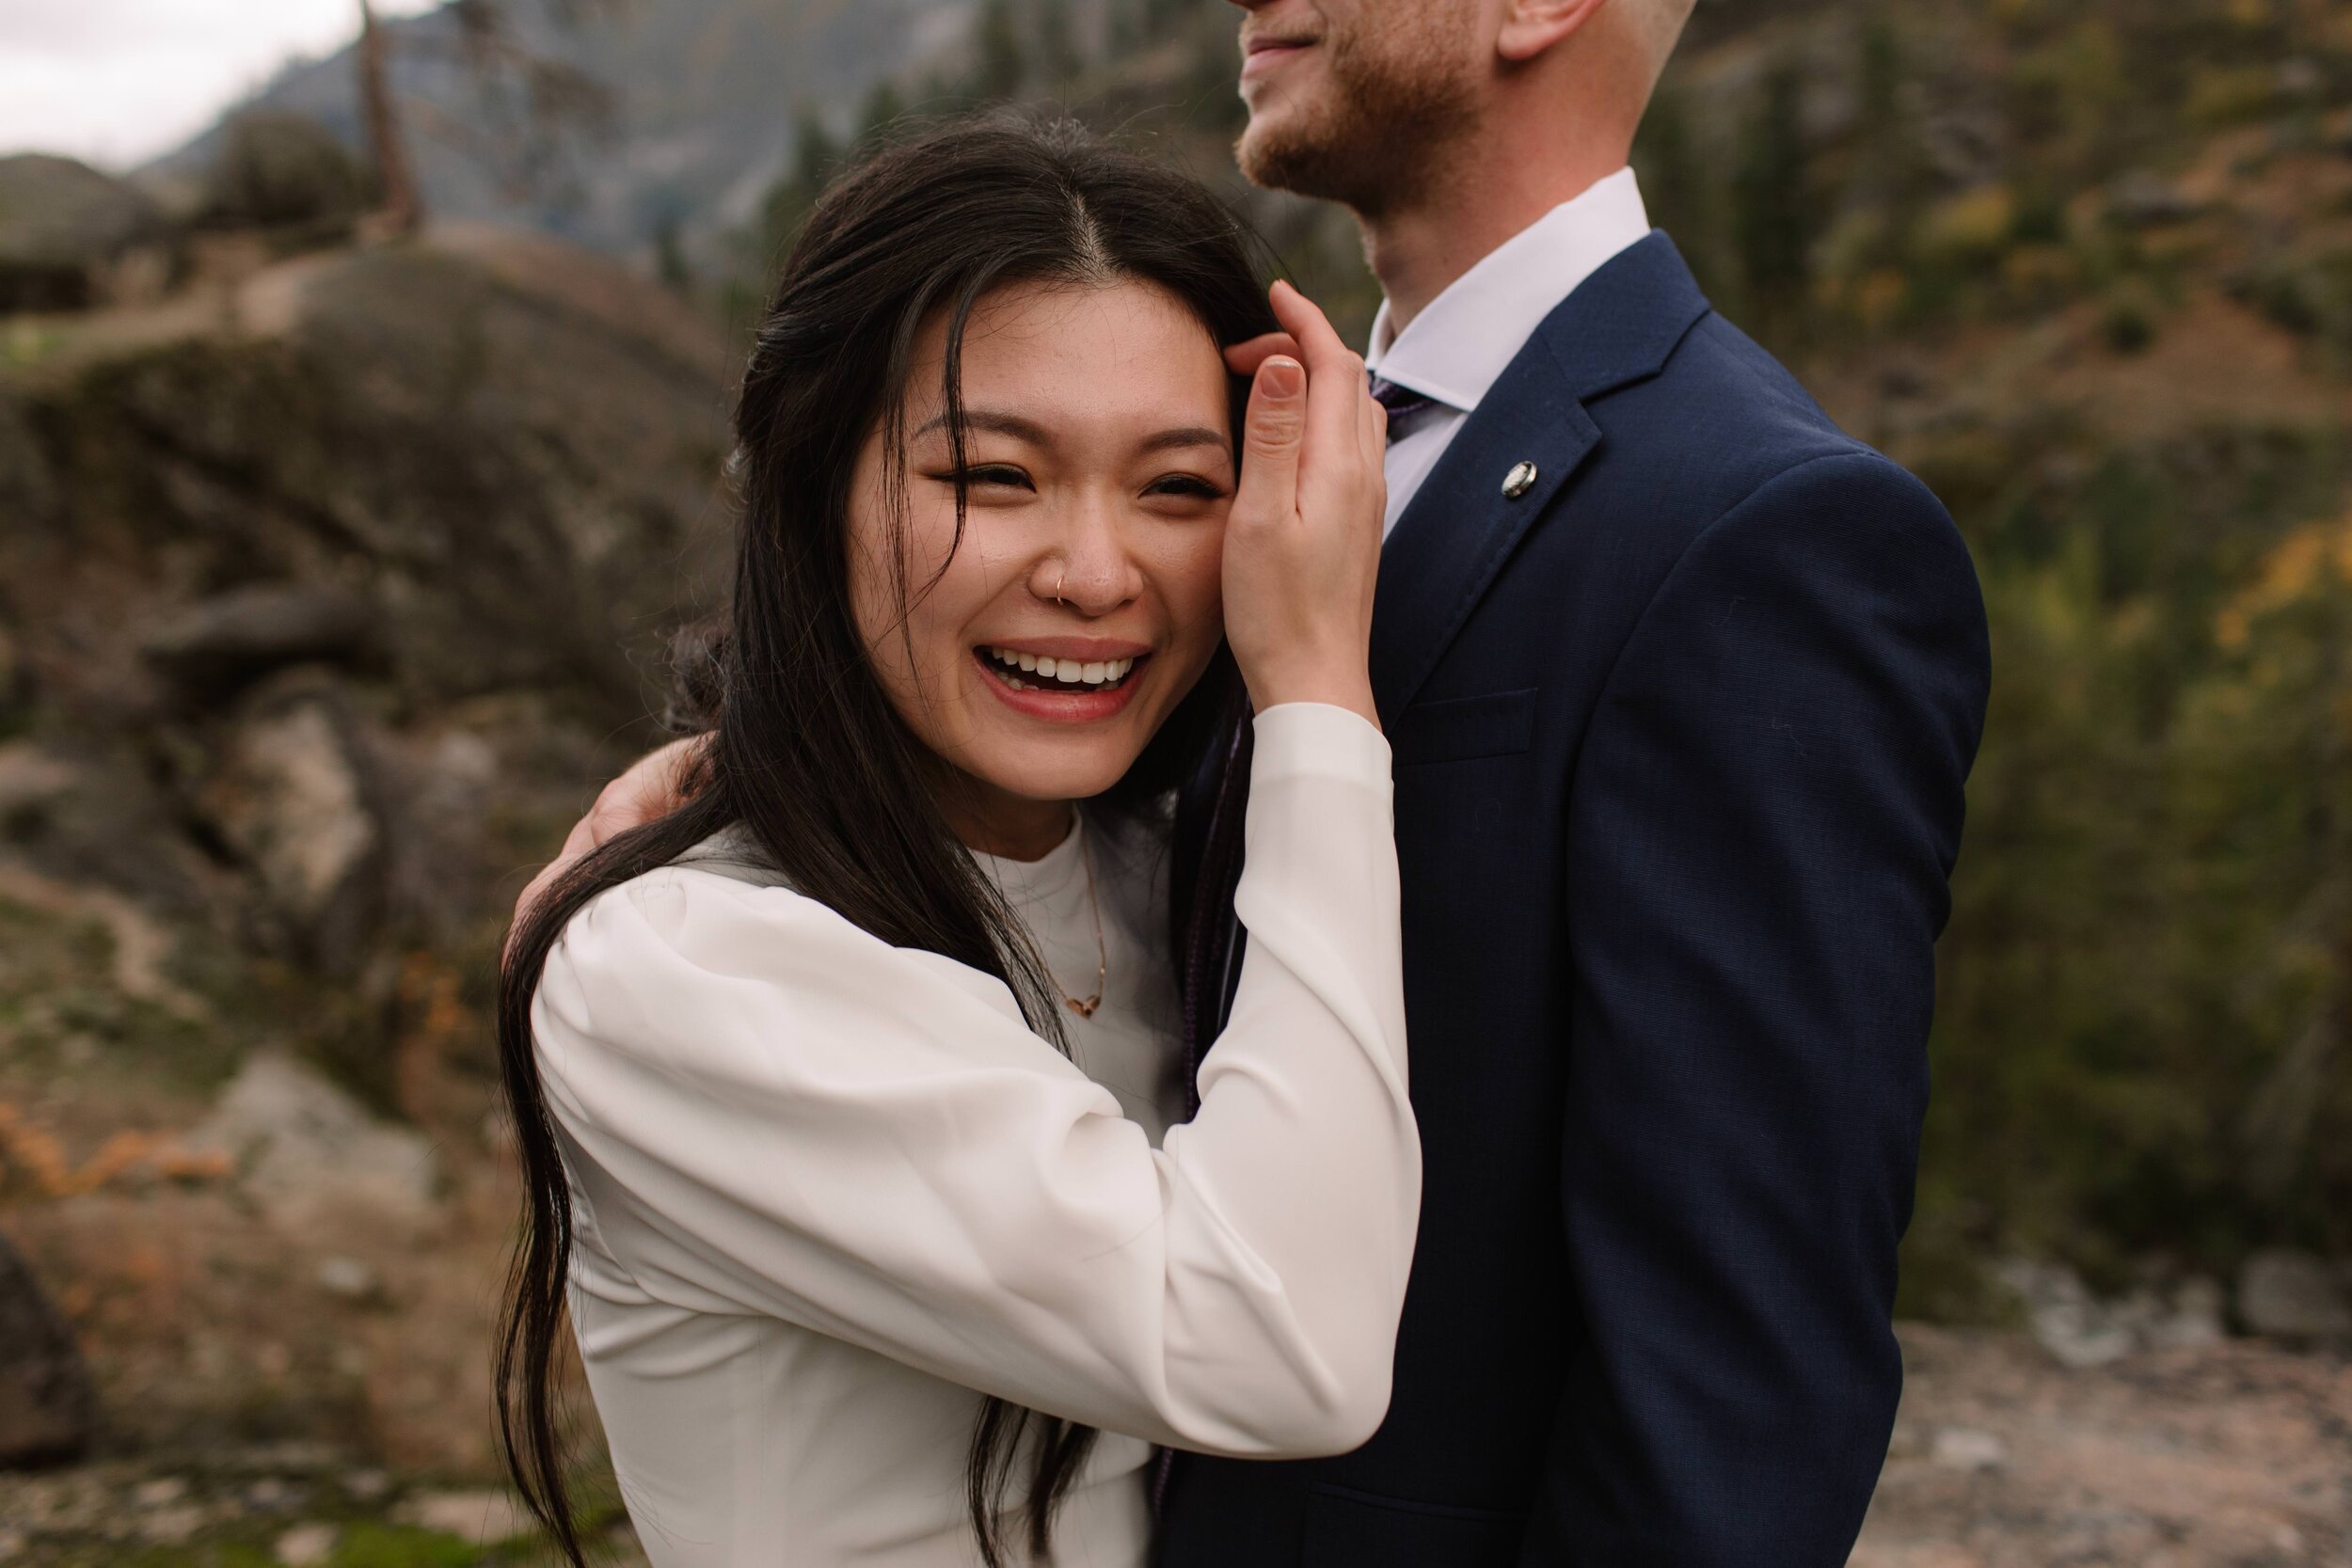 socal-san-diego-southern-california-elopement-small-wedding-outdoor-forest-mountains-waterfall-ceremony-leavenworth-washington-photographer-59.jpg